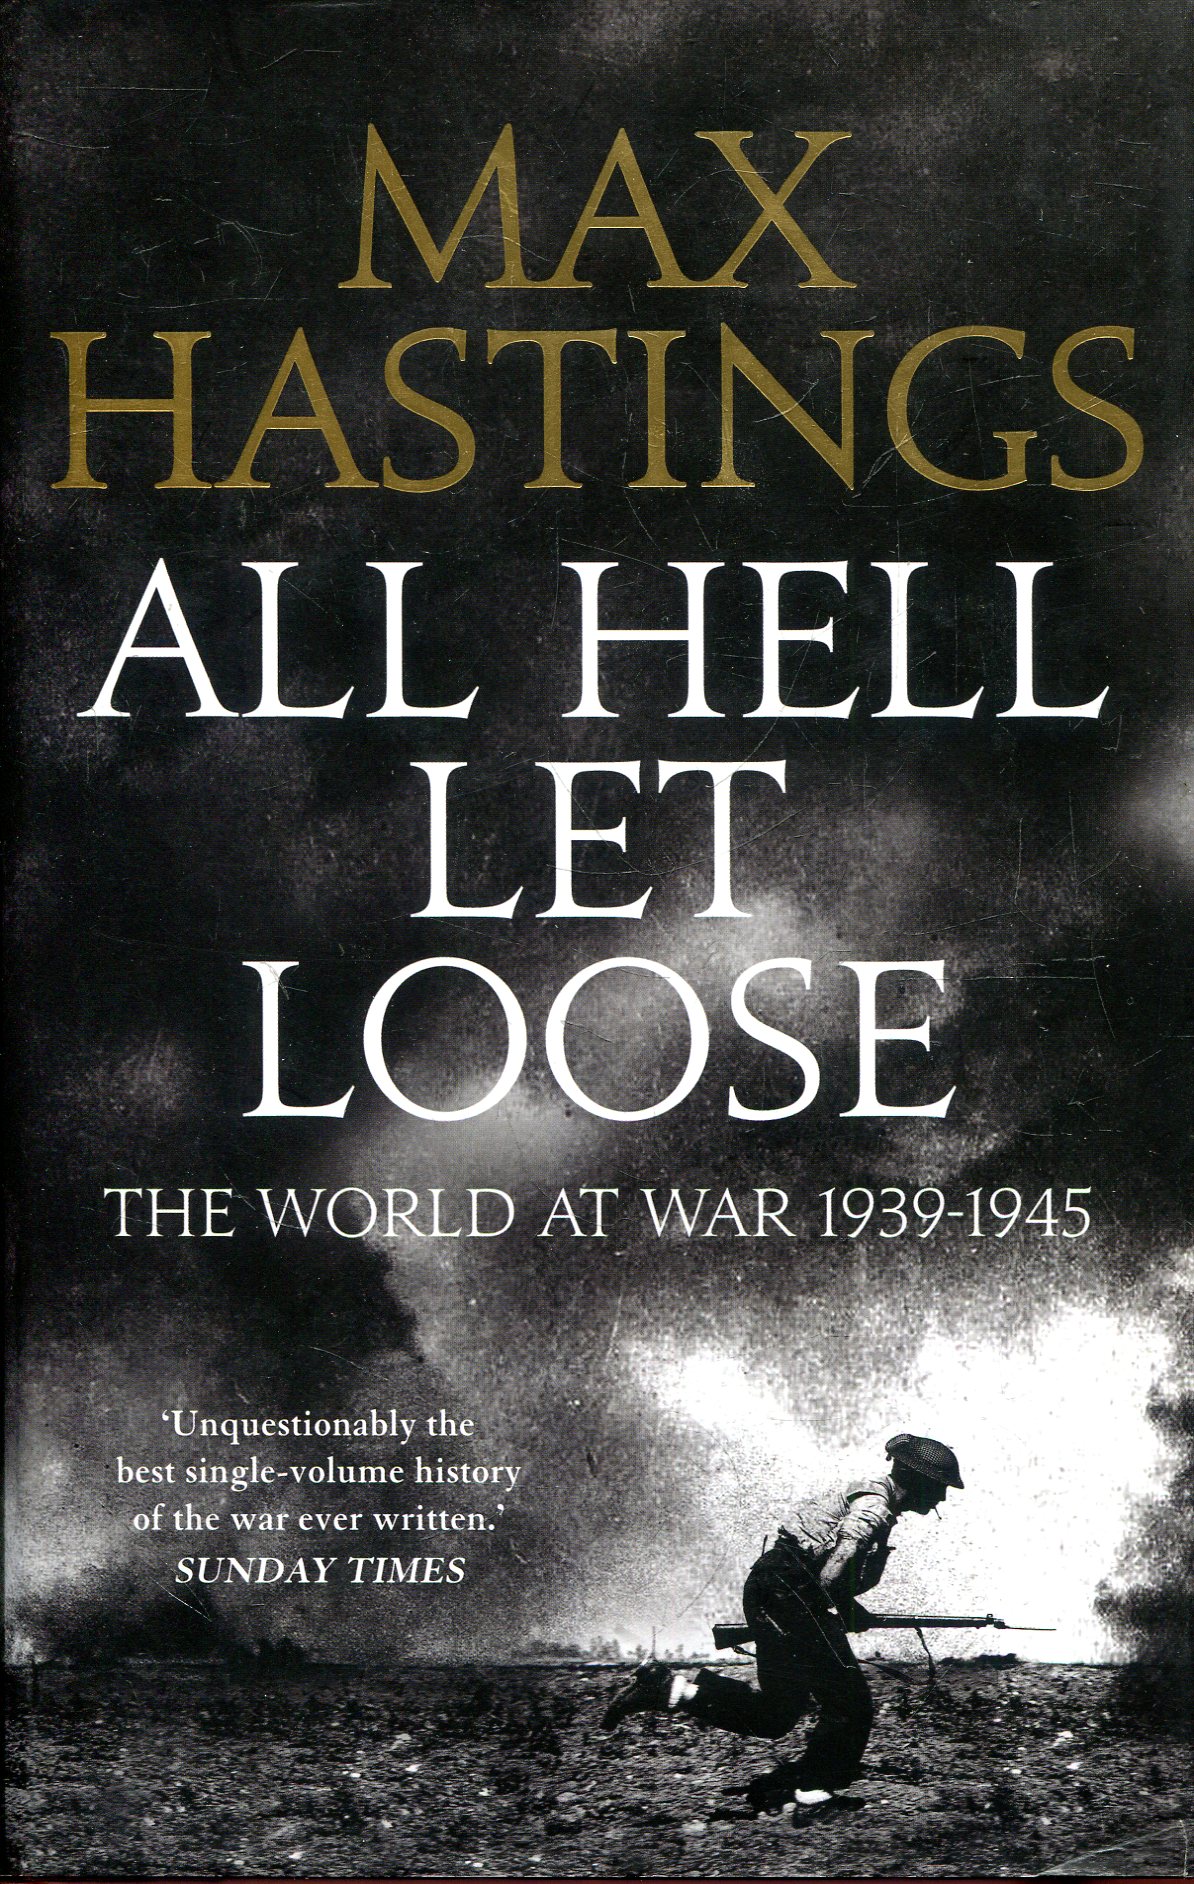 all hell let loose by max hastings